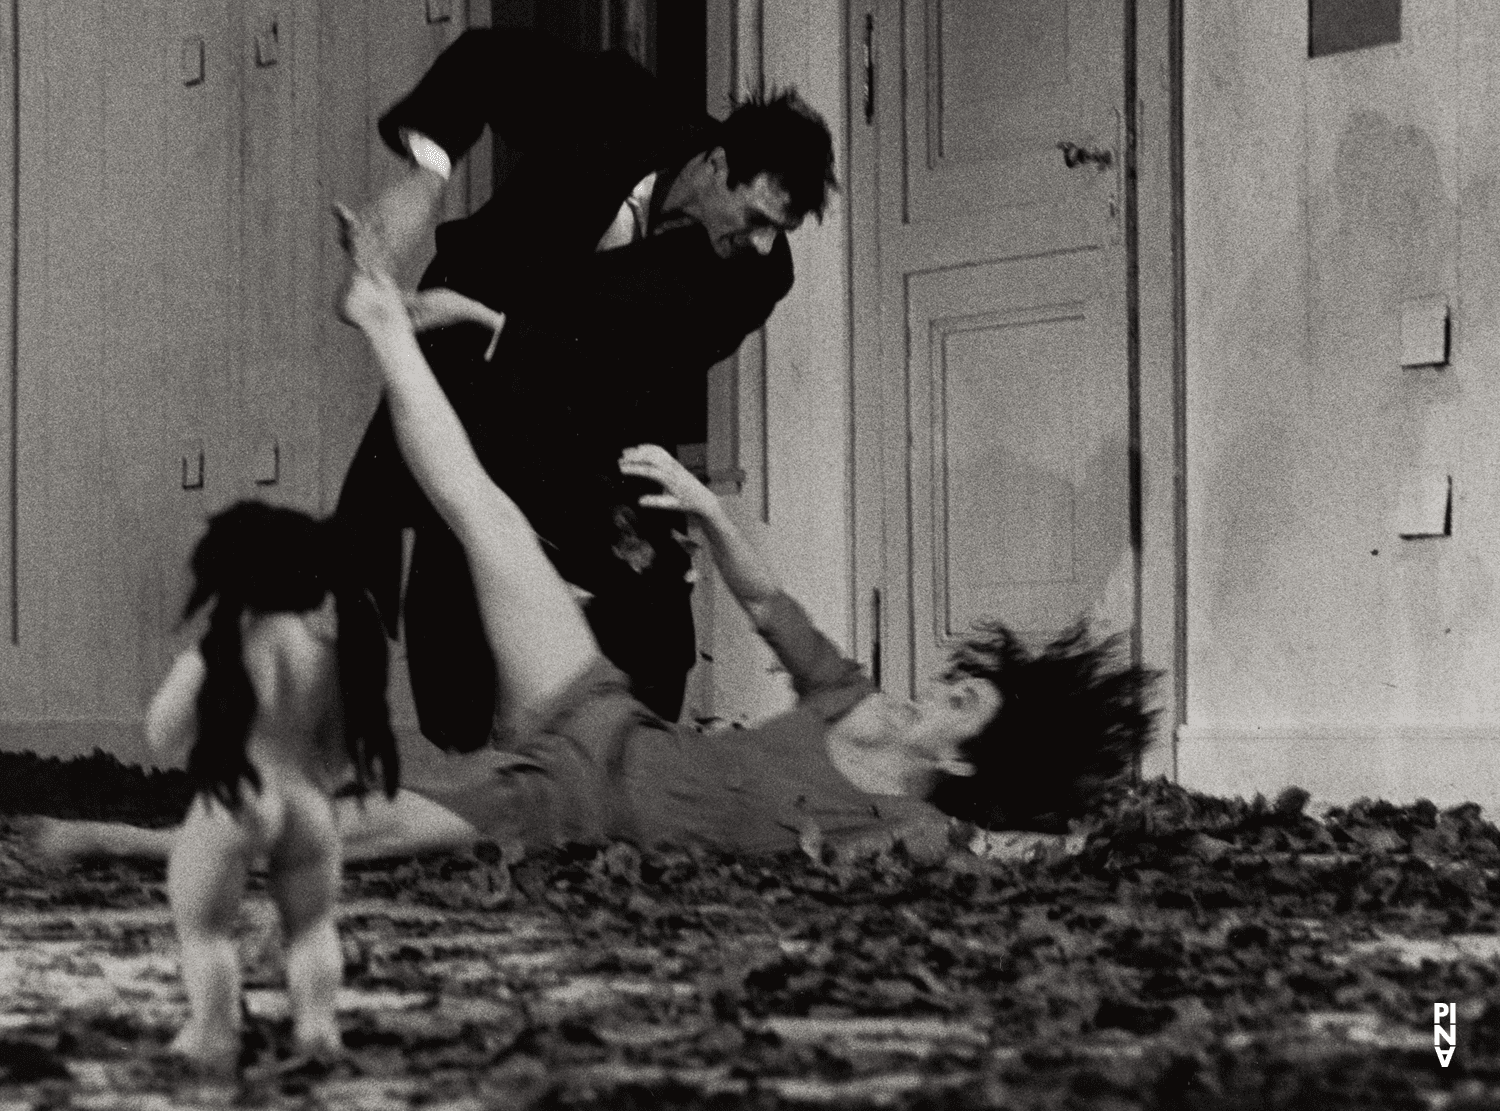 Antonio Carallo and Cristiana Morganti in “Bluebeard. While Listening to a Tape Recording of Béla Bartók's Opera "Duke Bluebeard's Castle"” by Pina Bausch